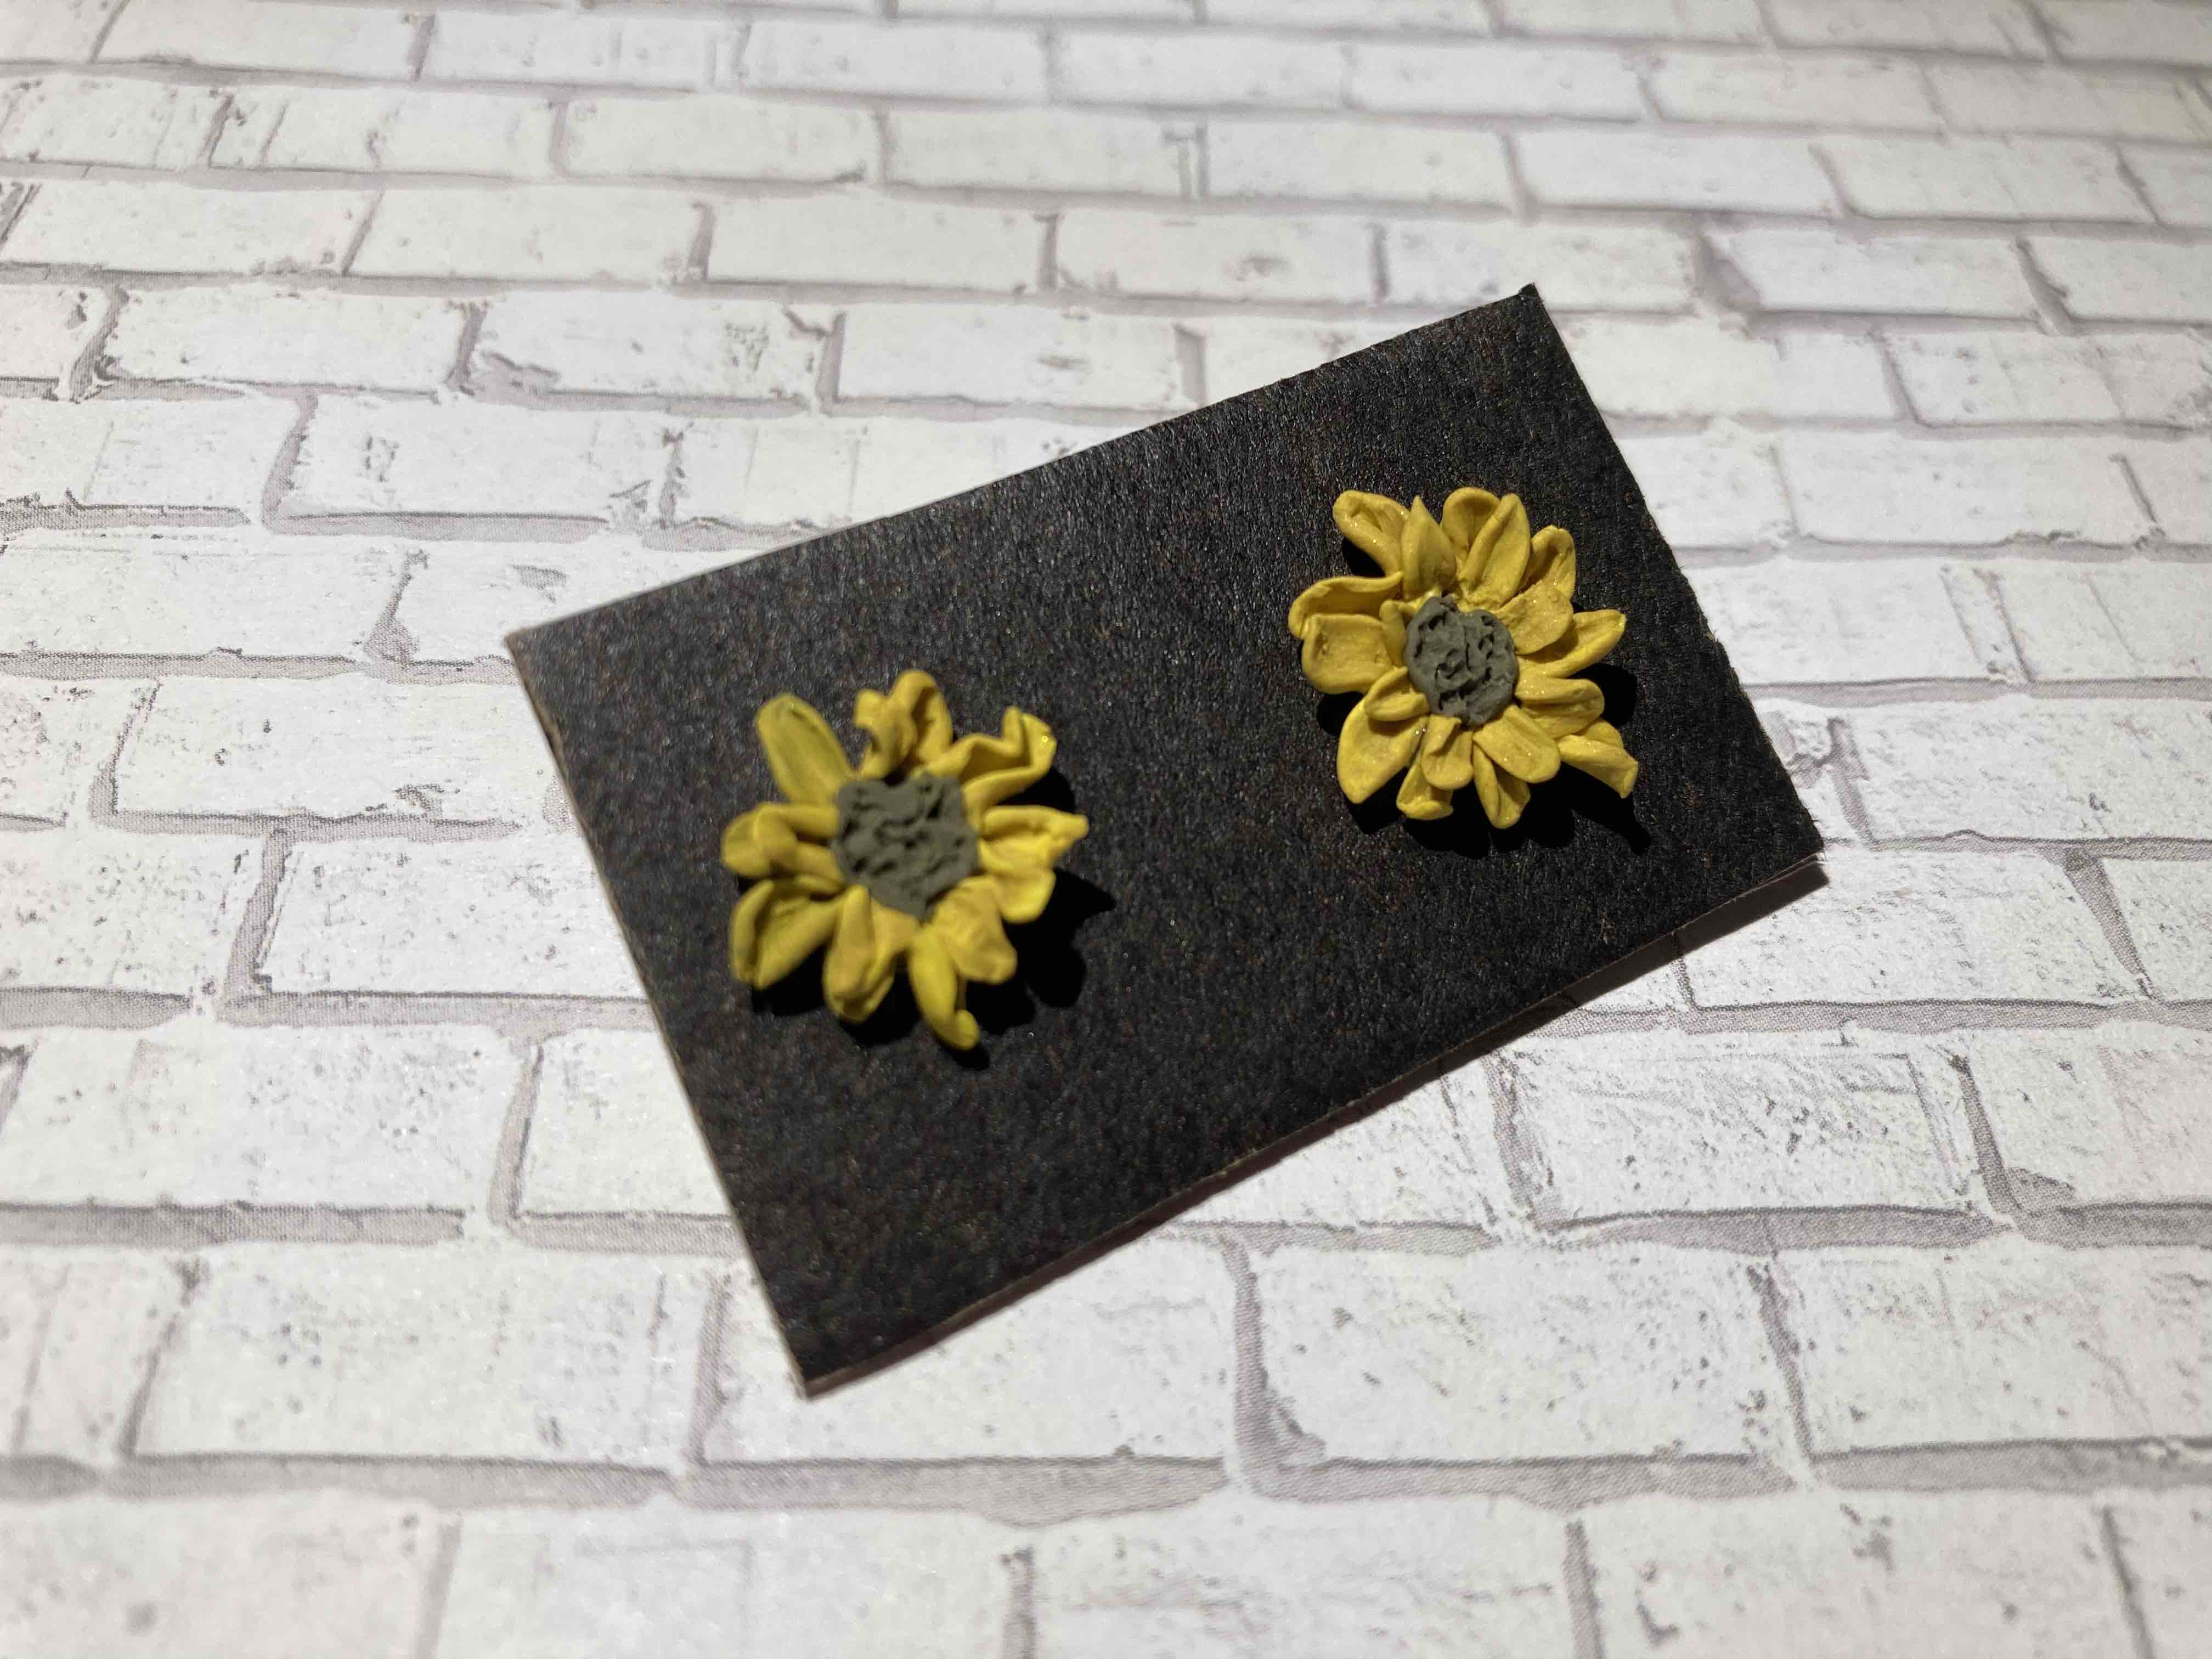 Sunflower Patch Studs | Yellow polymer sunflower studs with gold posts. Nickel free brass. Wear some sunshine on your ears!